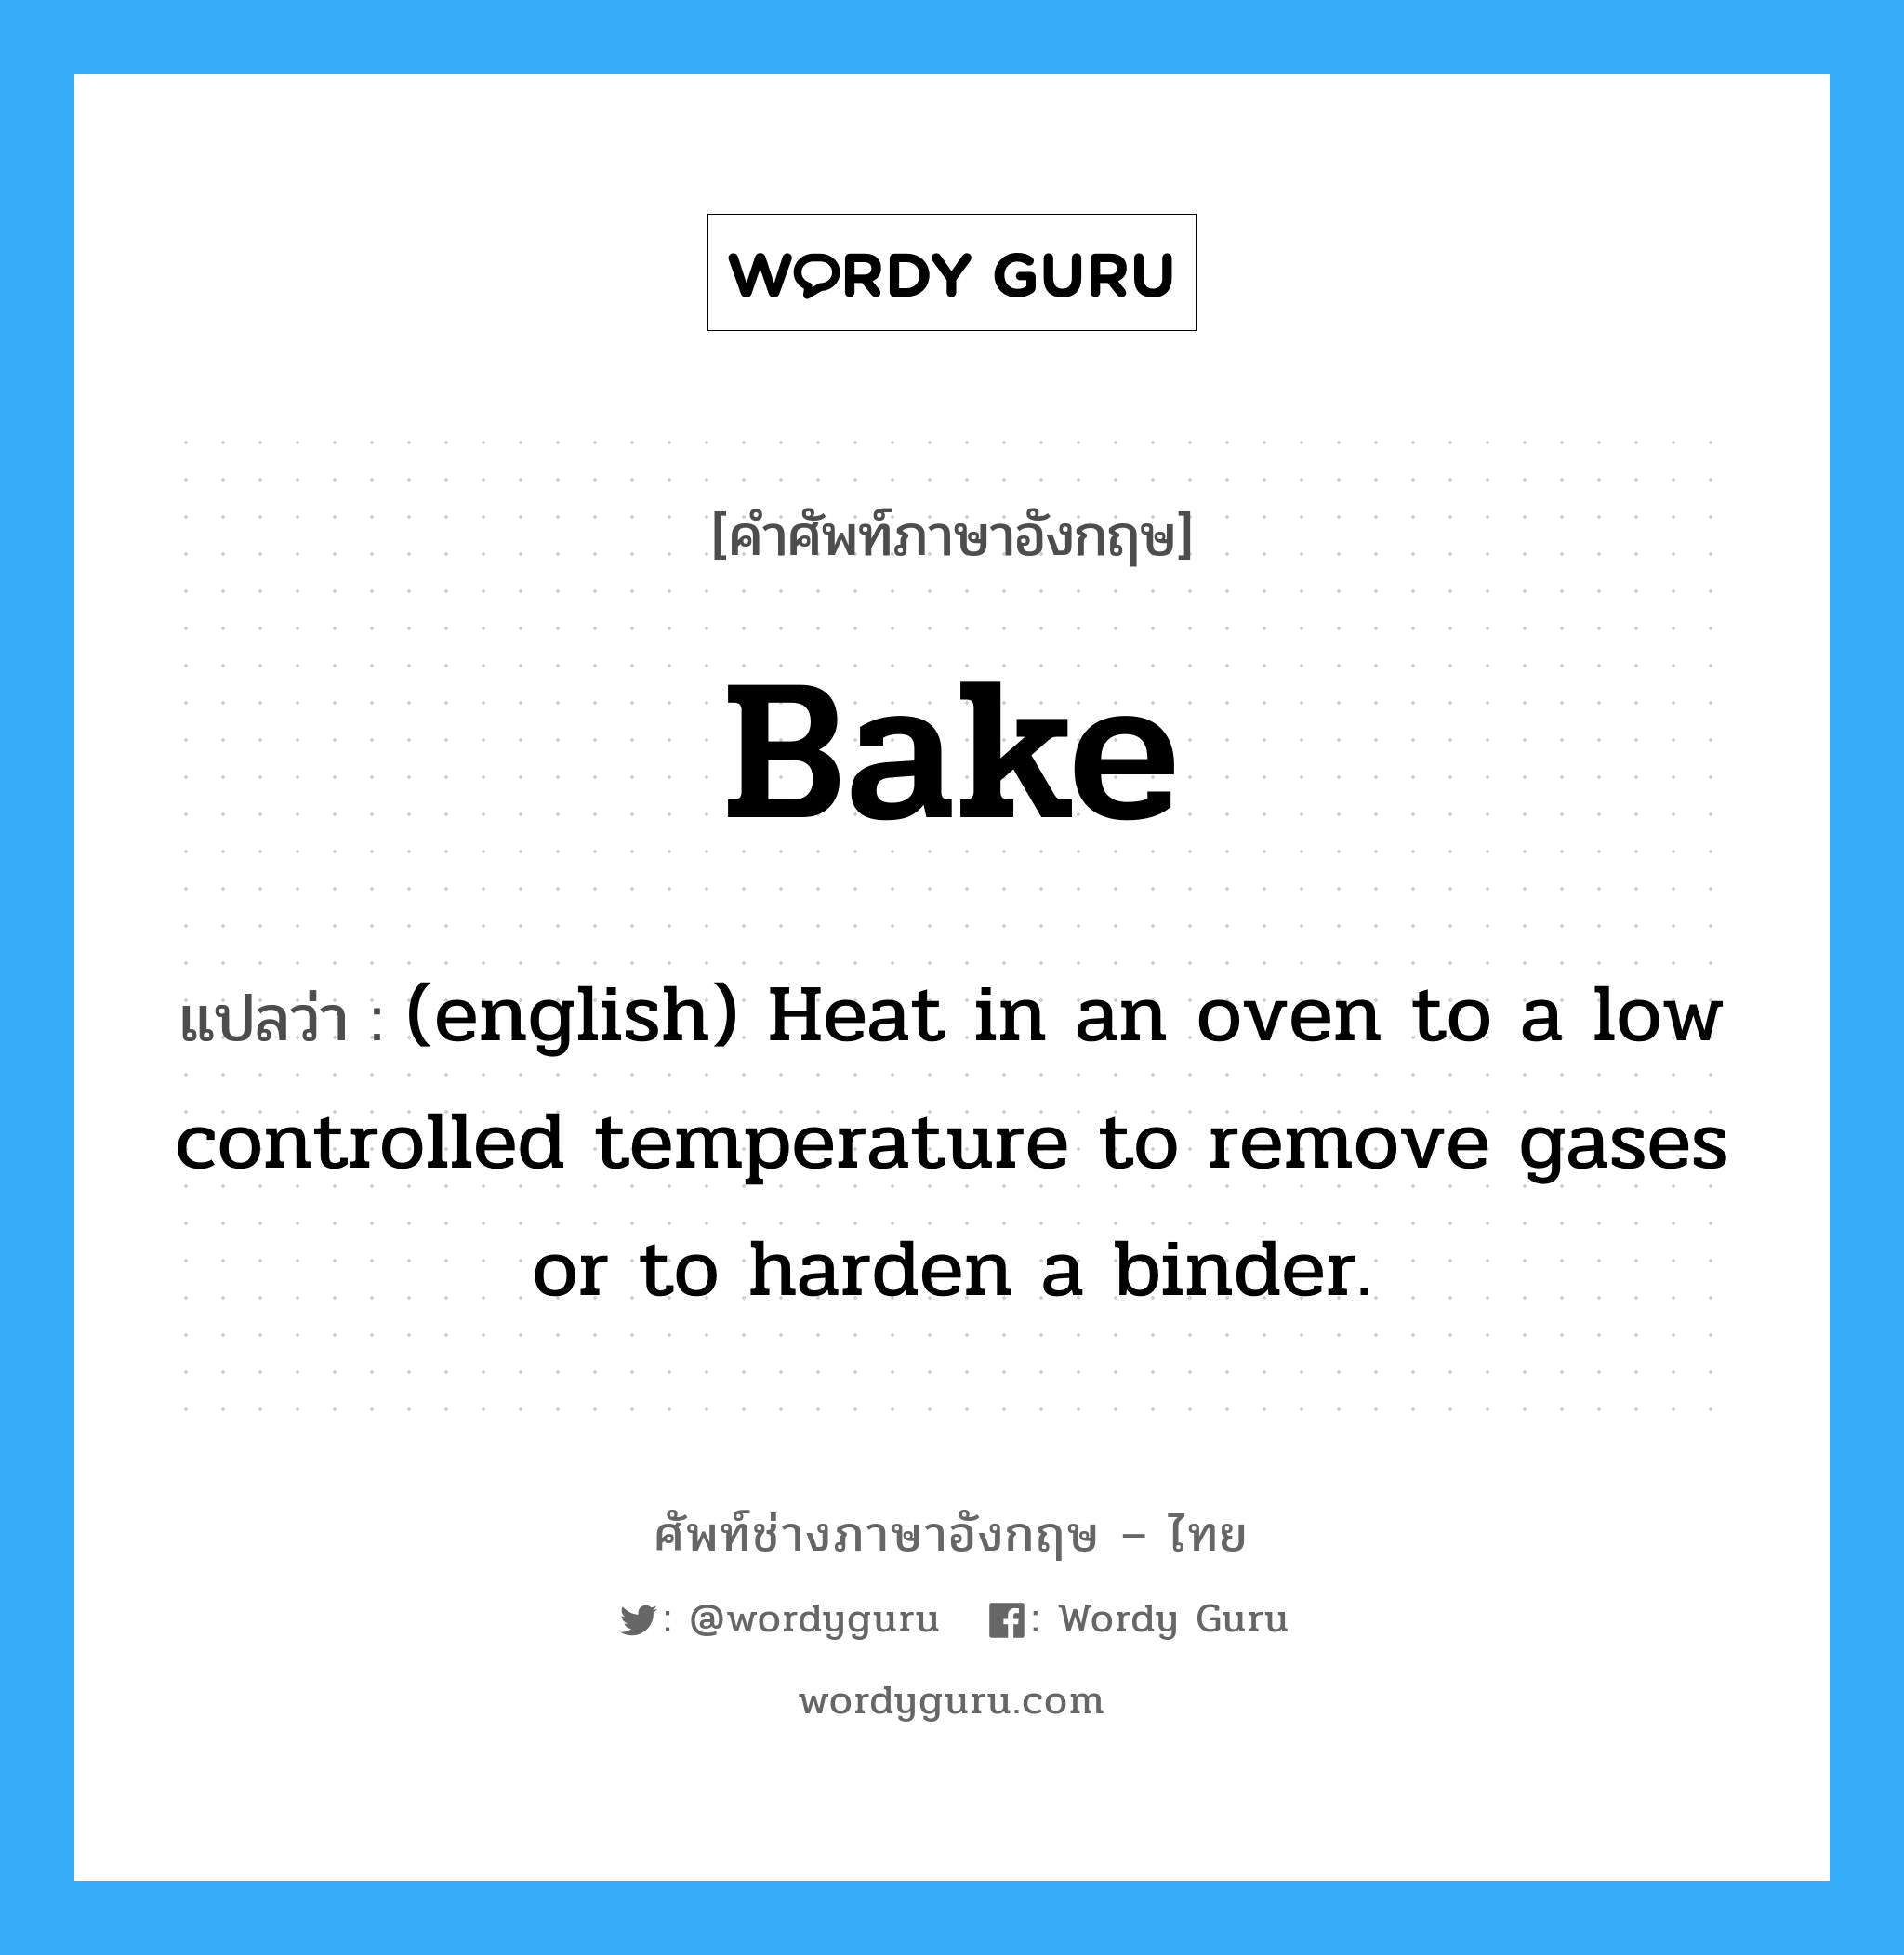 (english) Heat in an oven to a low controlled temperature to remove gases or to harden a binder. ภาษาอังกฤษ?, คำศัพท์ช่างภาษาอังกฤษ - ไทย (english) Heat in an oven to a low controlled temperature to remove gases or to harden a binder. คำศัพท์ภาษาอังกฤษ (english) Heat in an oven to a low controlled temperature to remove gases or to harden a binder. แปลว่า Bake